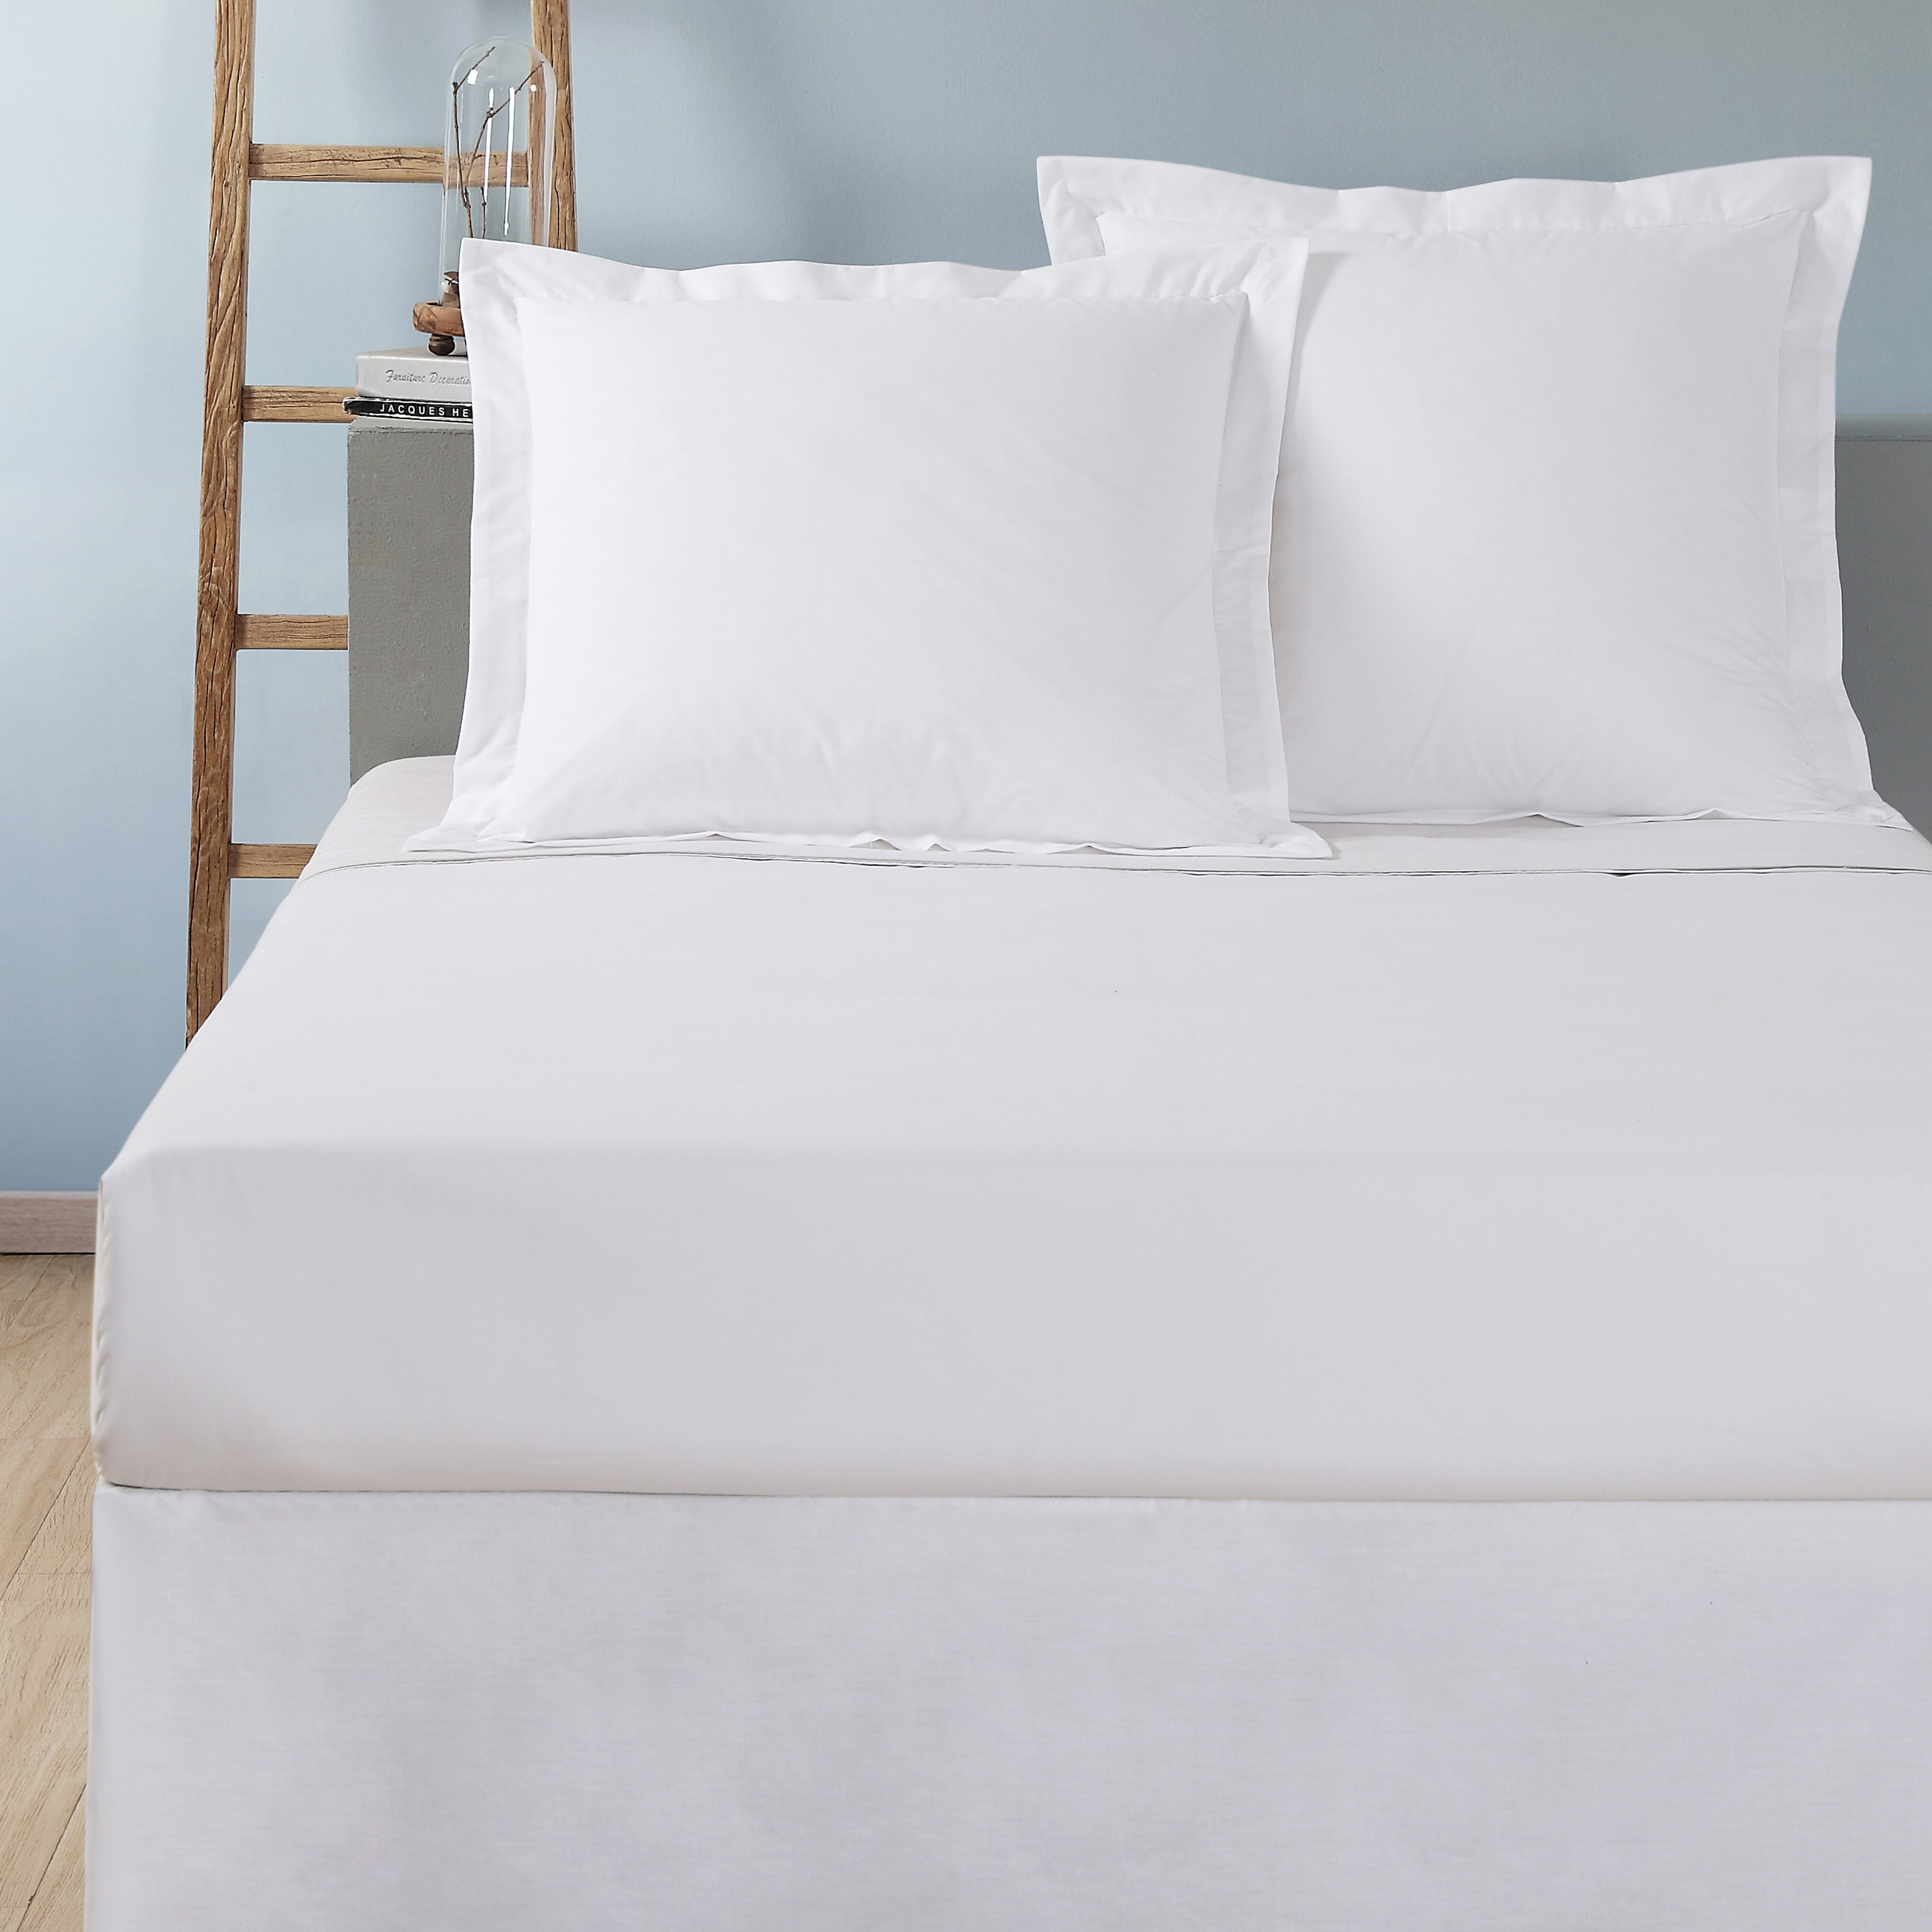 Anew Edit Fresh Ideas Tailored Euro Sham - Color: Ivory